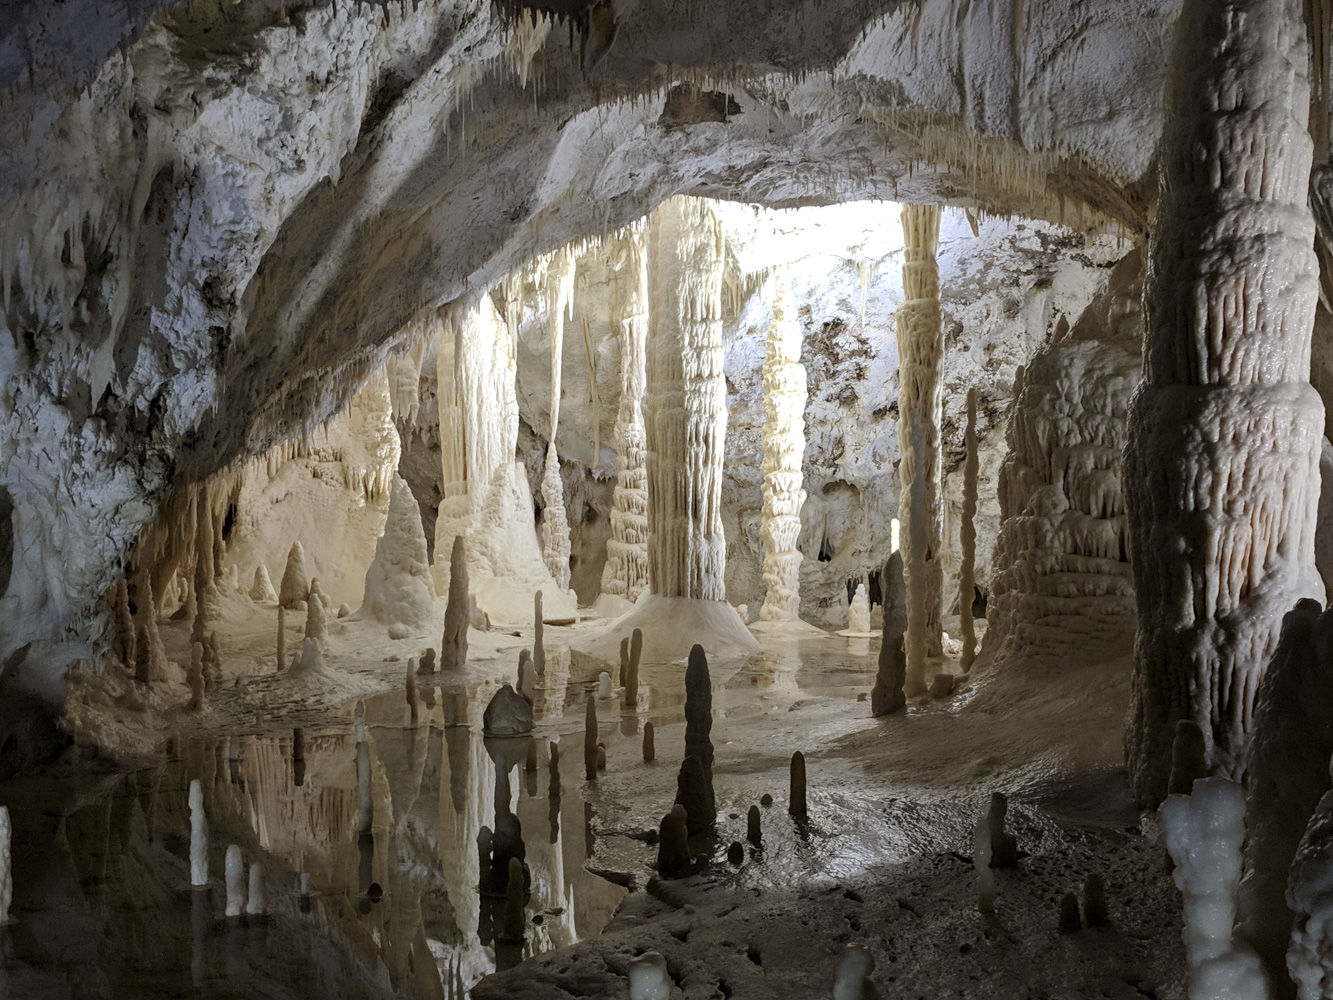 Reflections in the Frasassi Caves